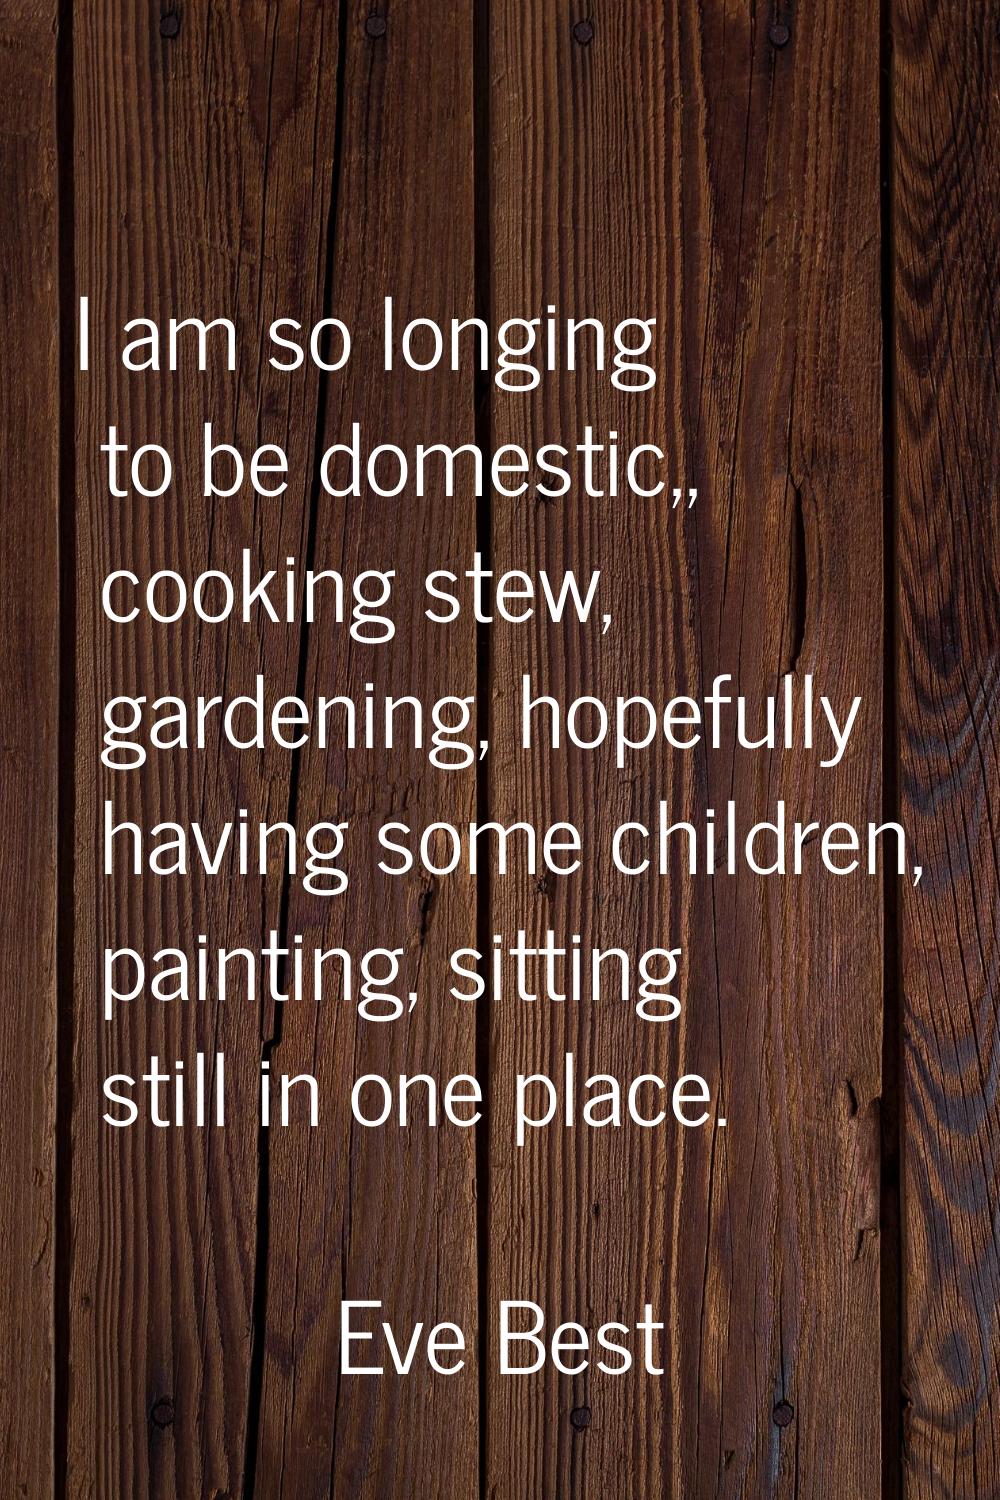 I am so longing to be domestic,, cooking stew, gardening, hopefully having some children, painting,